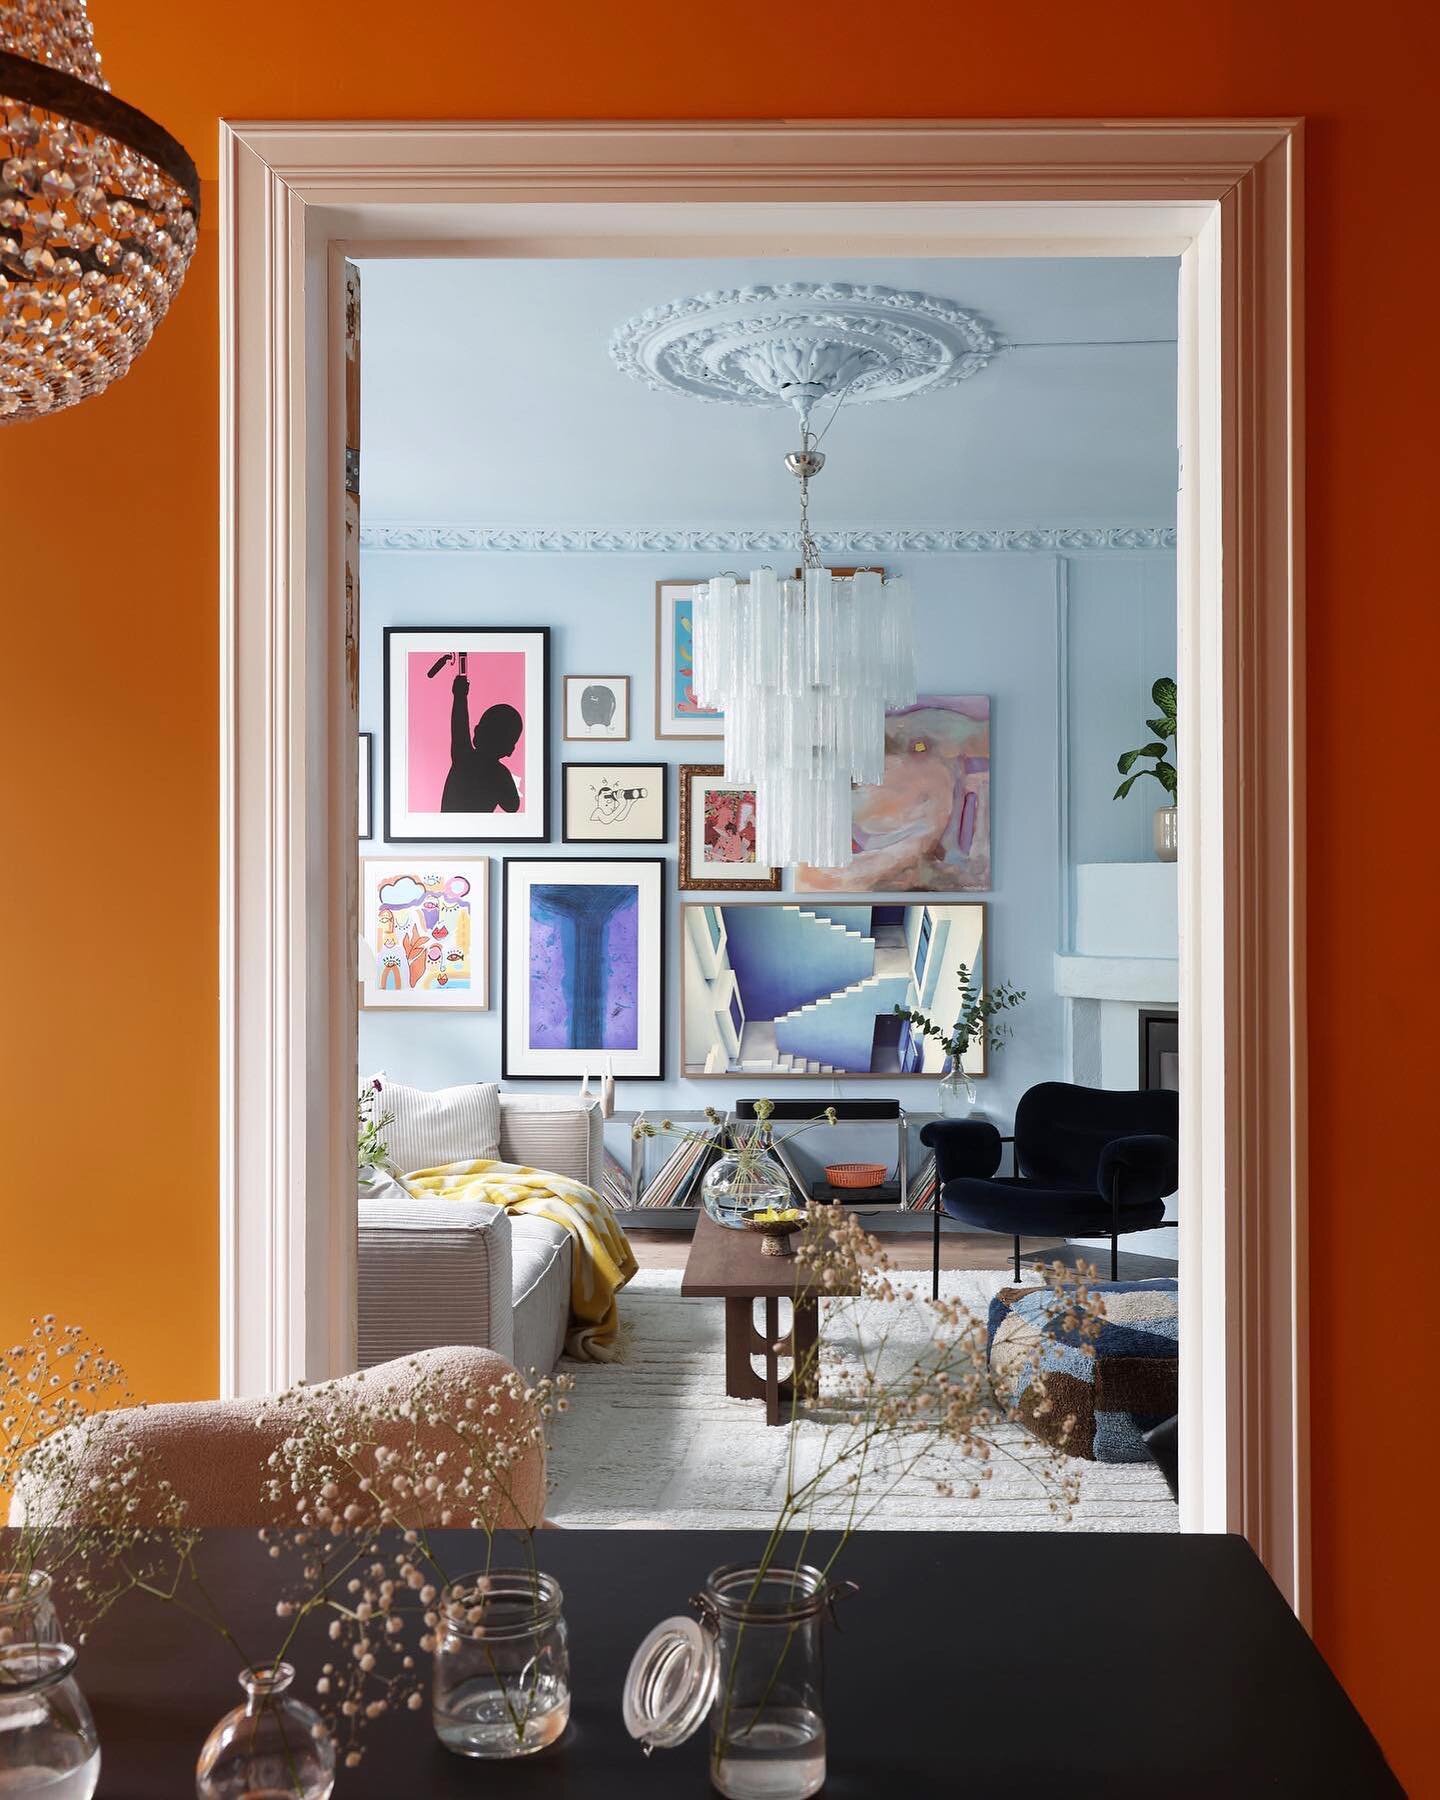 Living in a colorful oasis of creativity! this art-filled apartment is a visual feast for the eyes. full of vibrant hues and unique art. So inspiring! 

Styling @twentyten_projects 
Photo @filippatredal 

#work #interiordesign #interior #art #interio